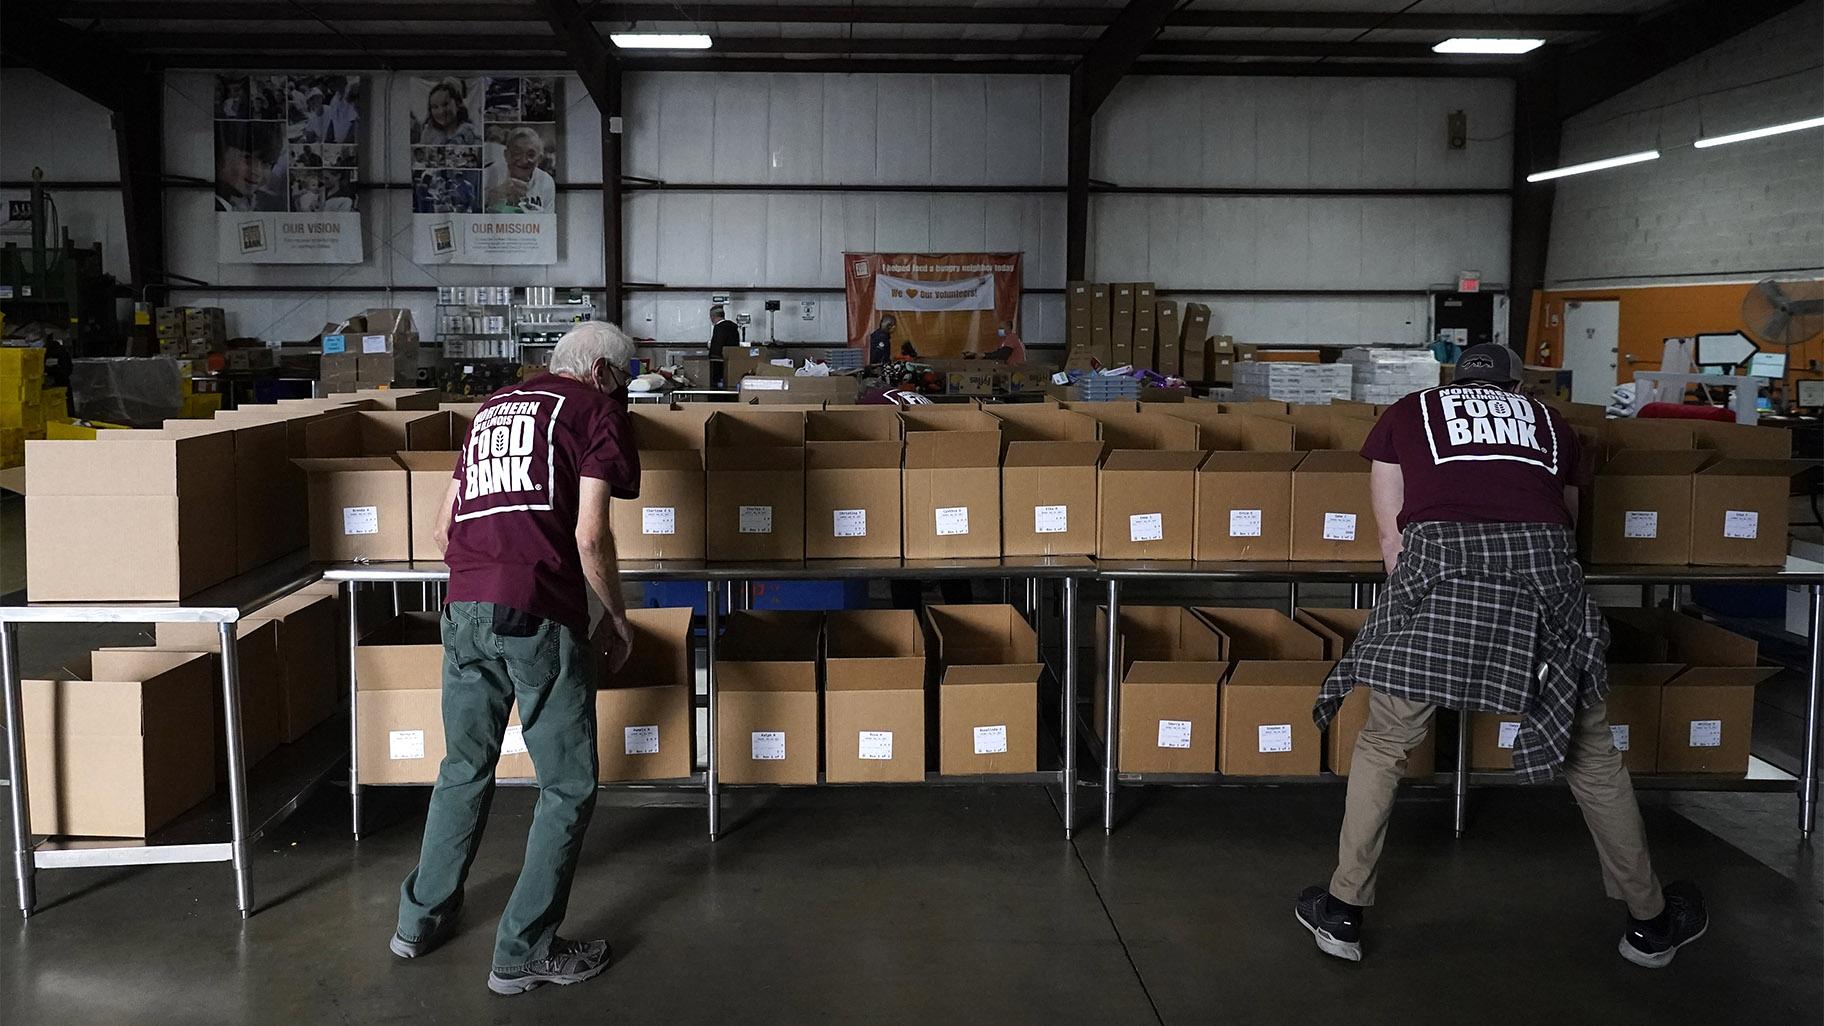 Volunteers Joe O'Connor, left, and Eric Leuck prepare boxes that will be filled with food at the Northern Illinois Food Bank and delivered by DoorDash drivers for area residents who are homebound Wednesday, Nov. 10, 2021, in Park City, Ill. (AP Photo / Charles Rex Arbogast)